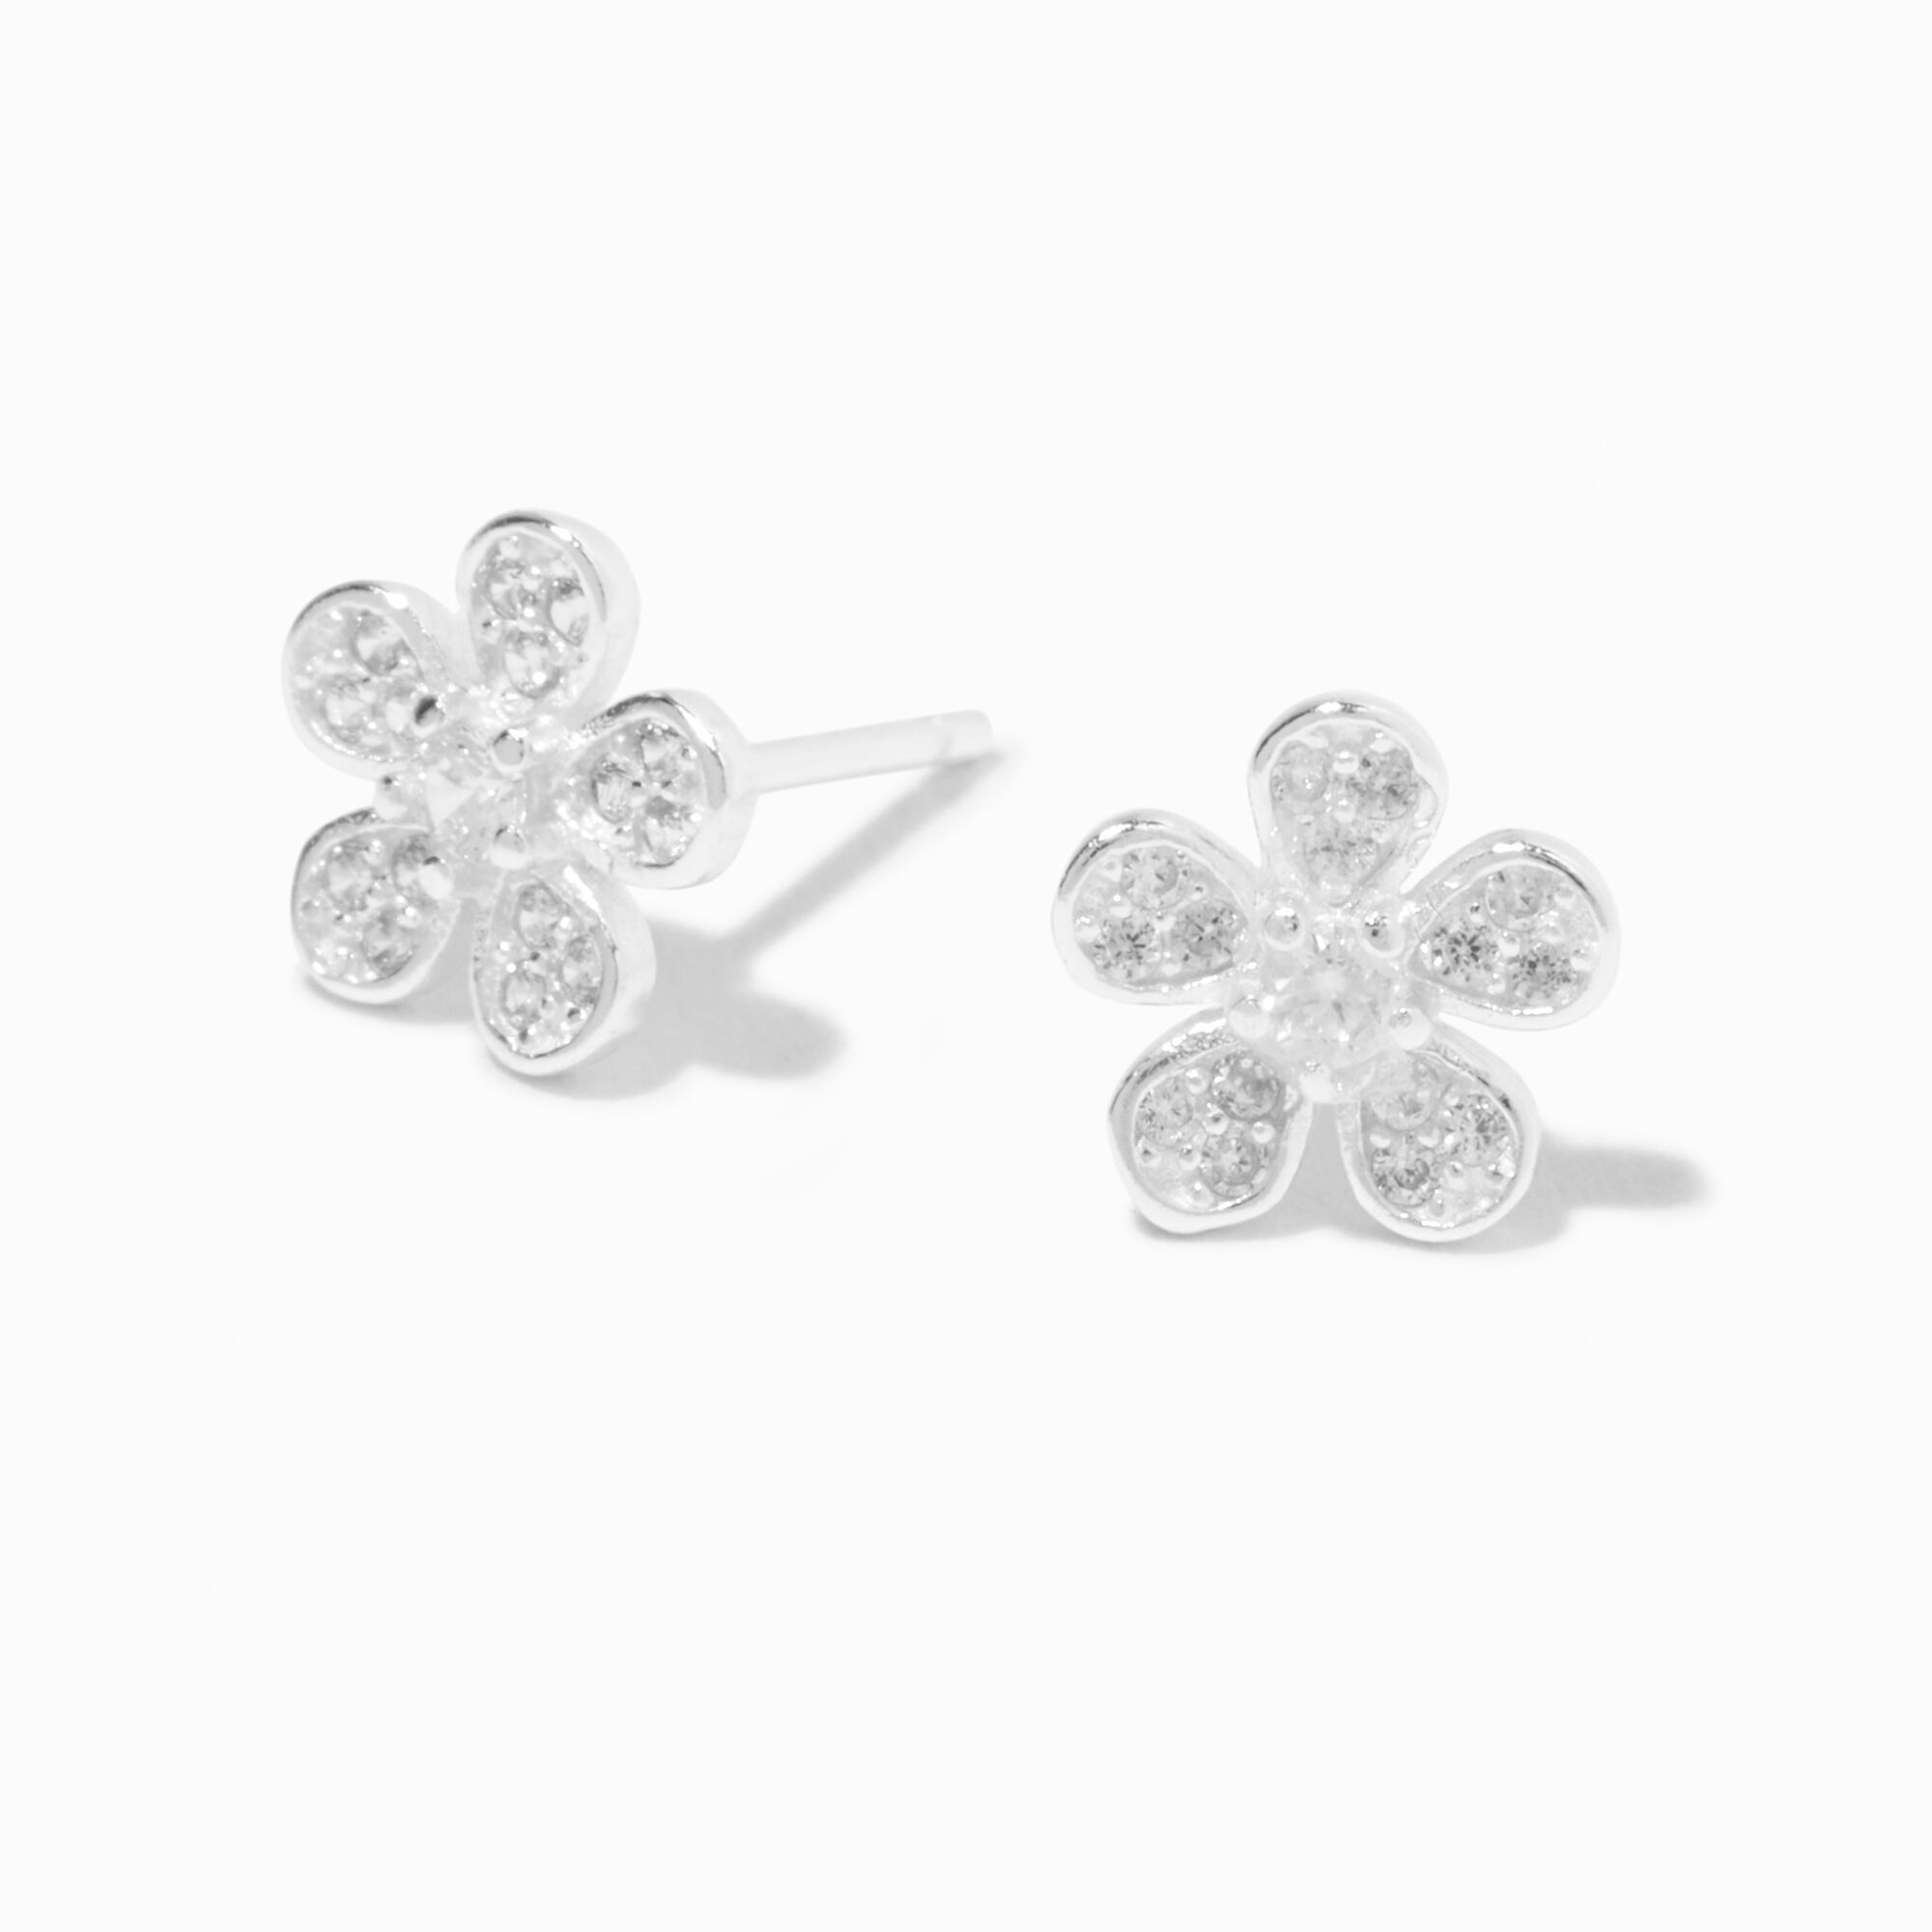 View Claires Pavé Daisy Stud Earrings Silver information